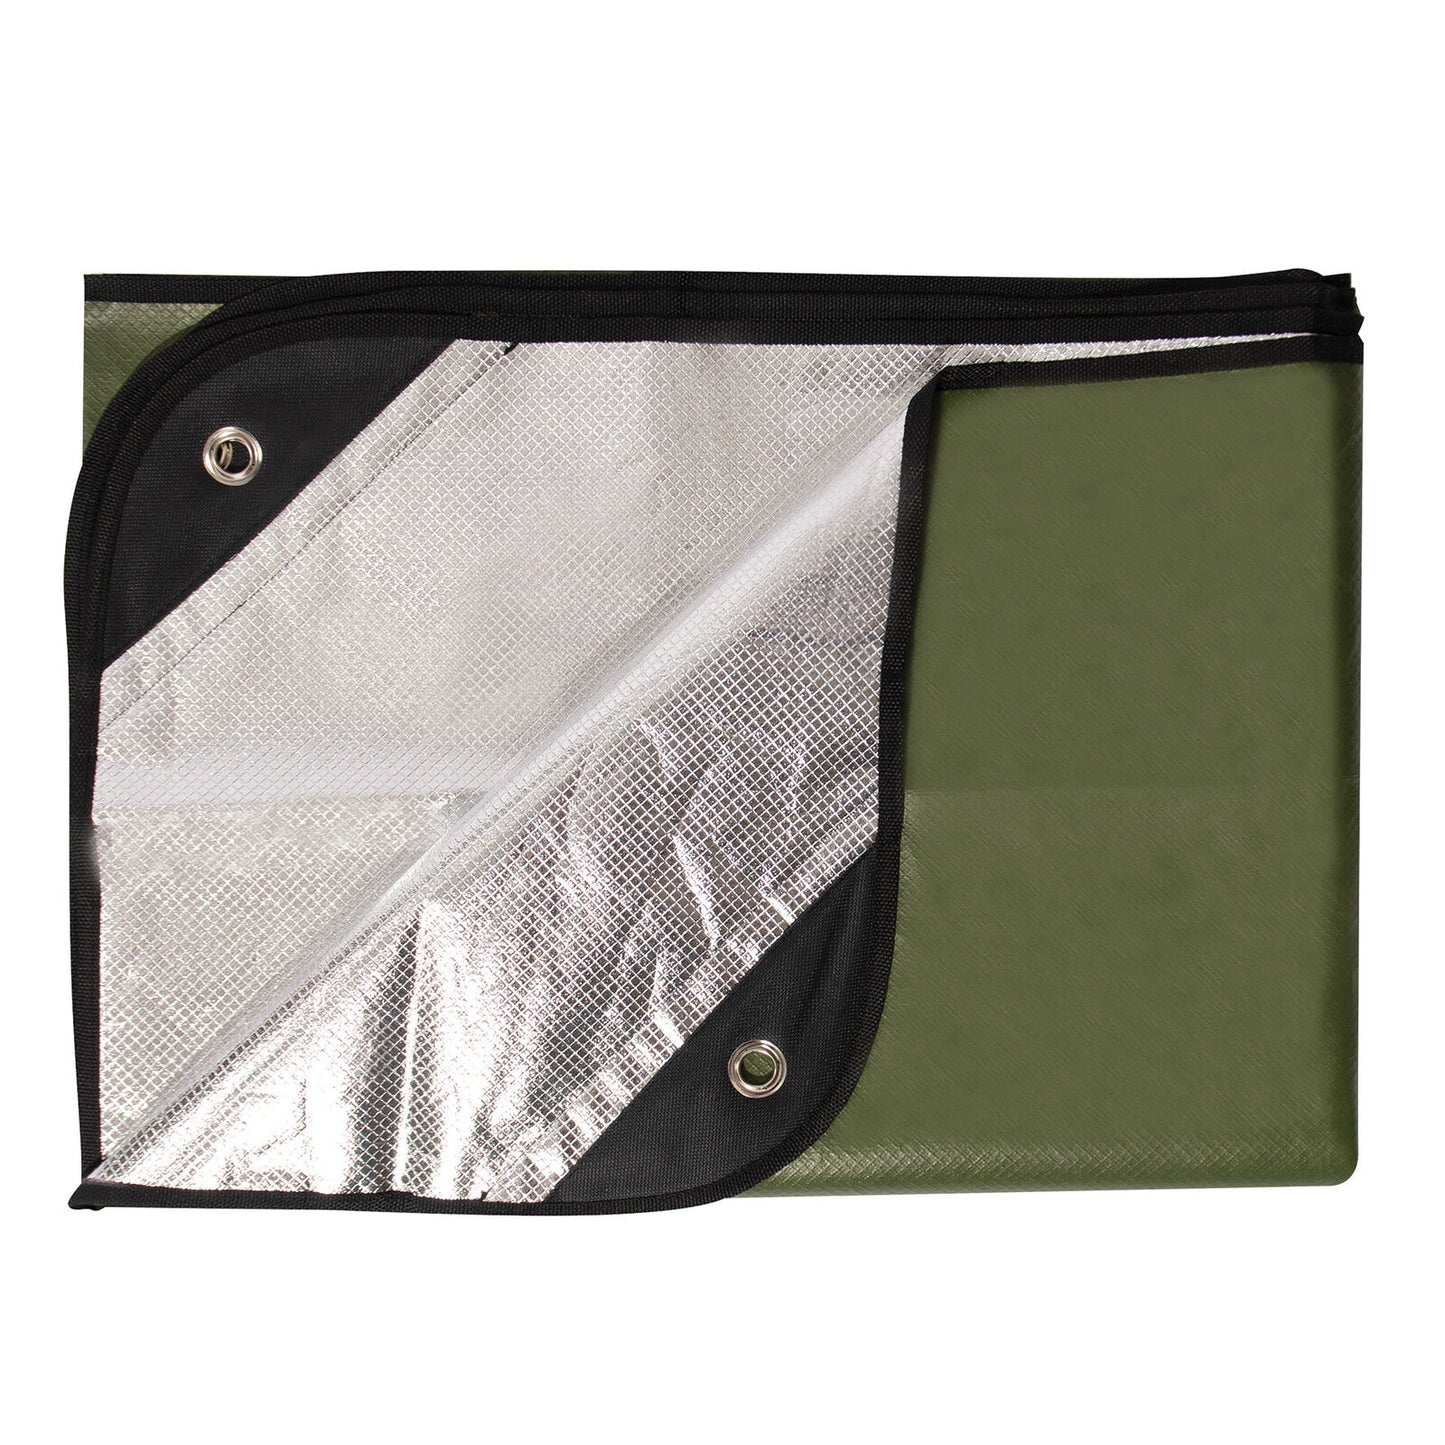 Heavy Duty Survival Blanket In Olive Drab 60x84 Emergency Hiking Camping Shelter